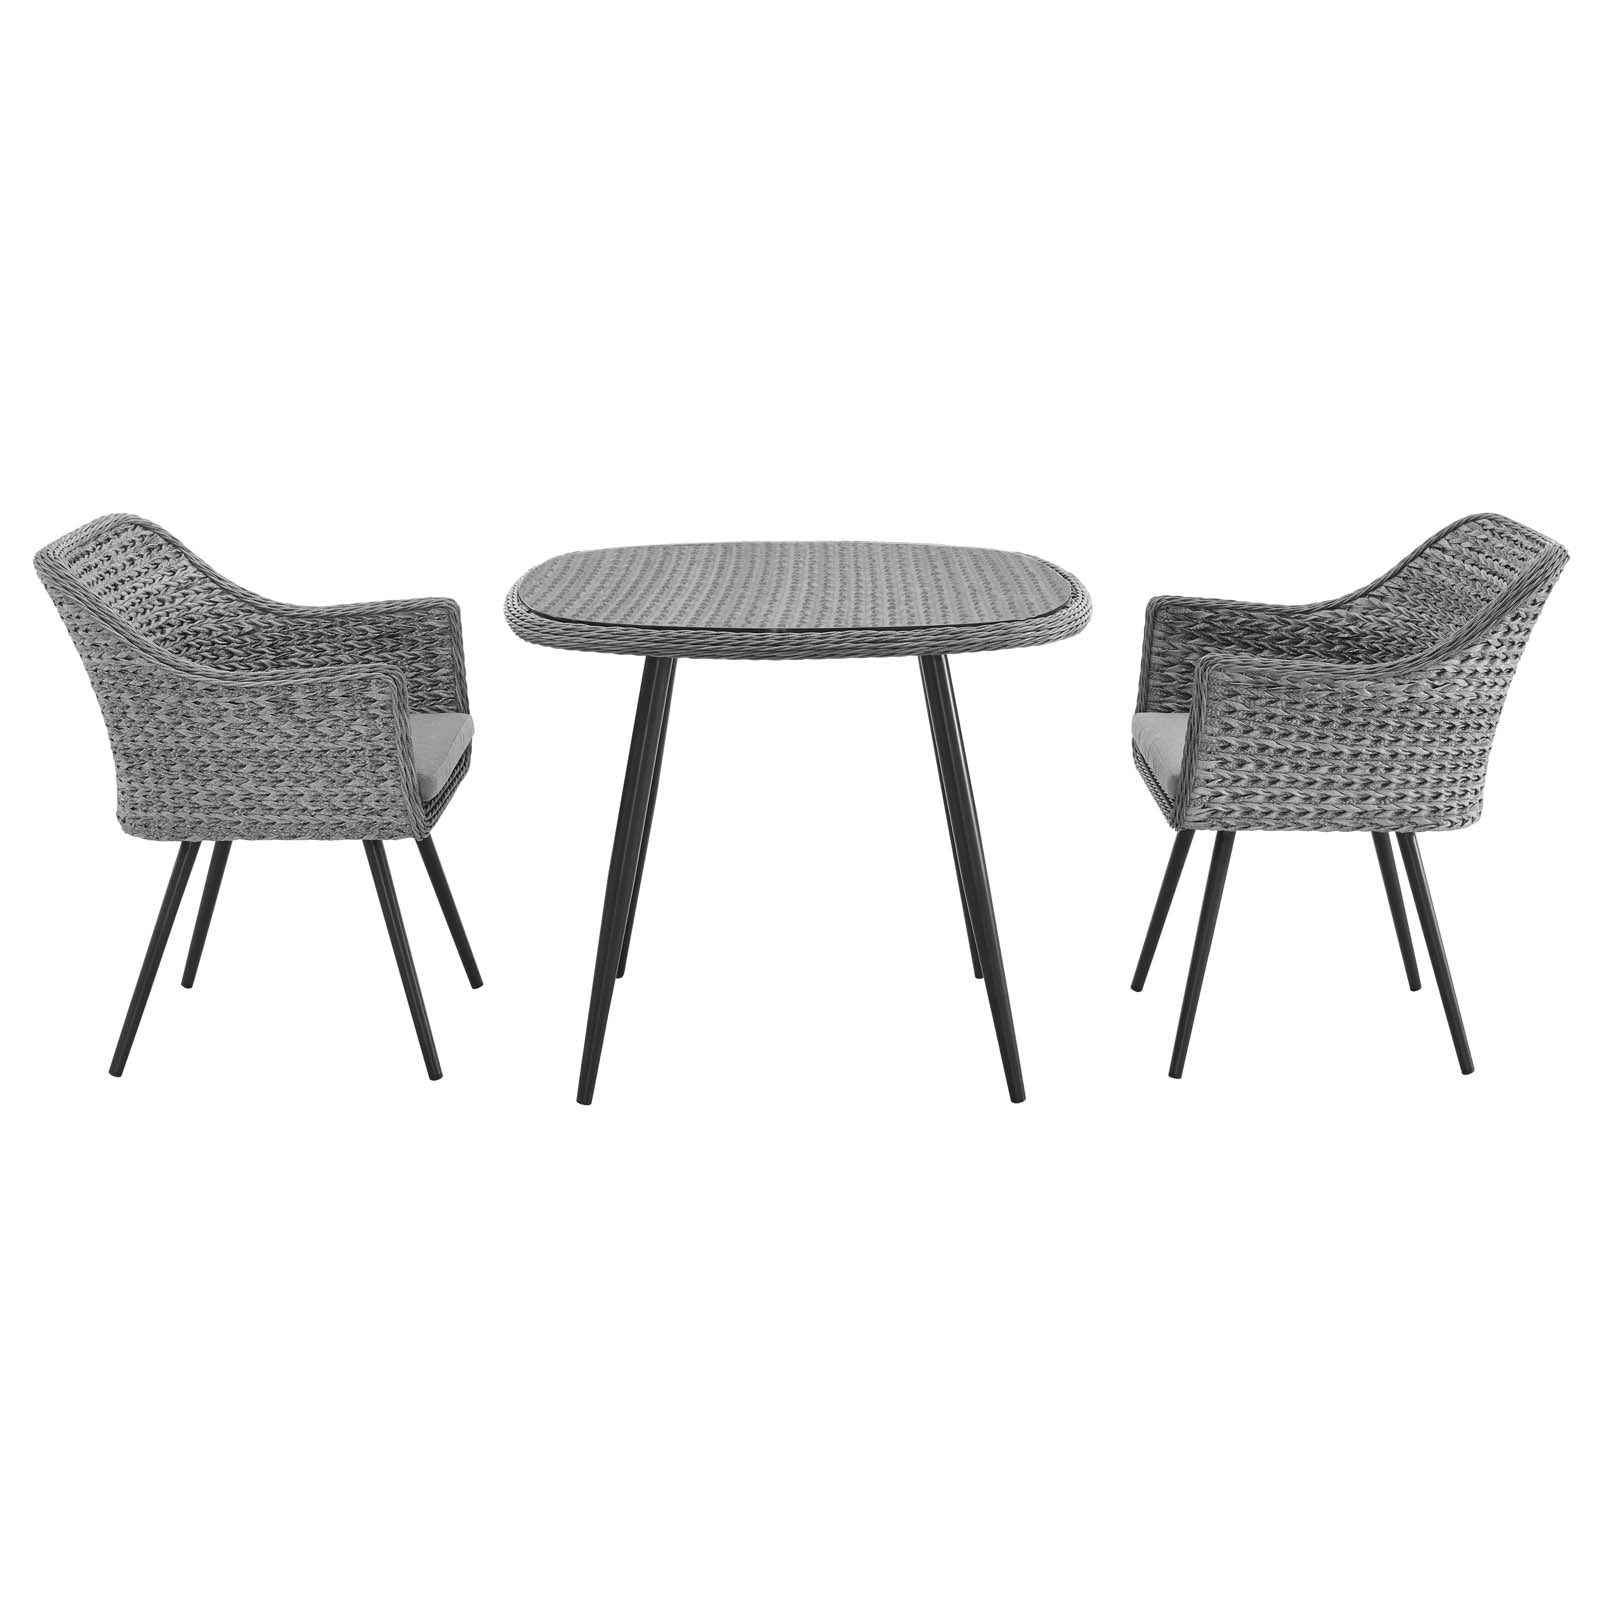 Endeavor 3 Piece Outdoor Patio Wicker Rattan Dining Set - East Shore Modern Home Furnishings